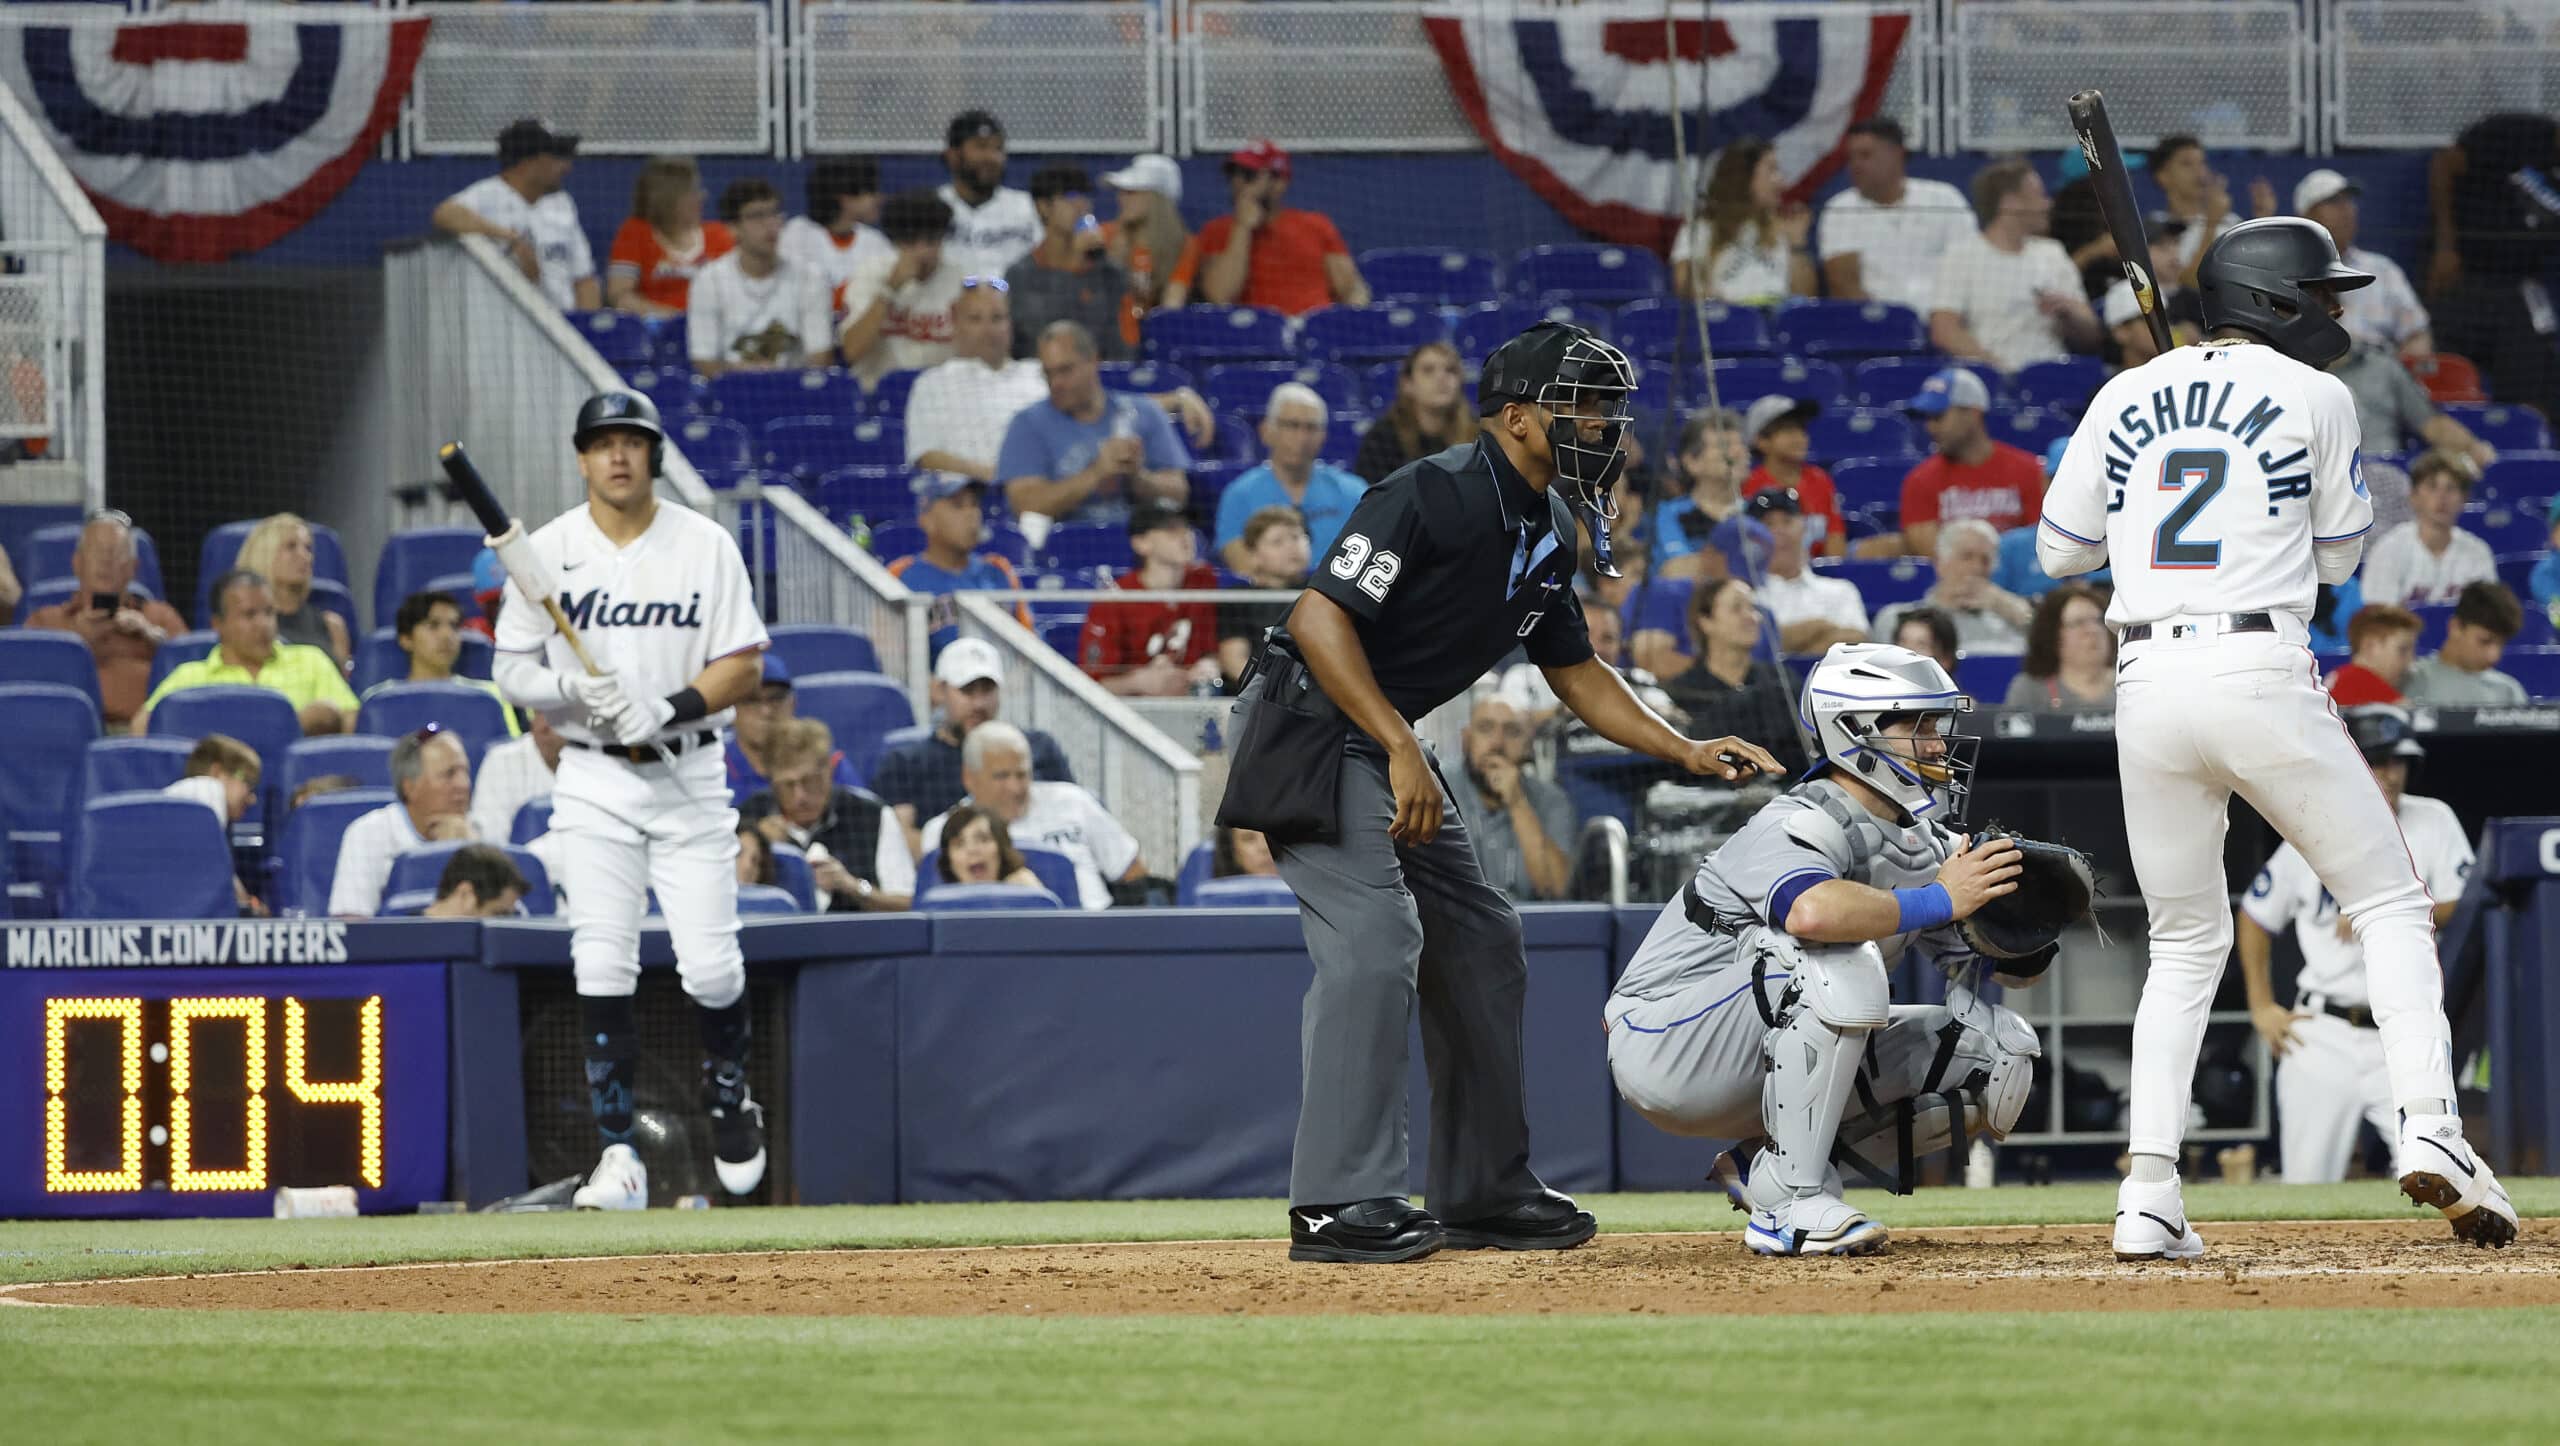 The Marlins Go All-In on Baseball's New Rules - The New York Times